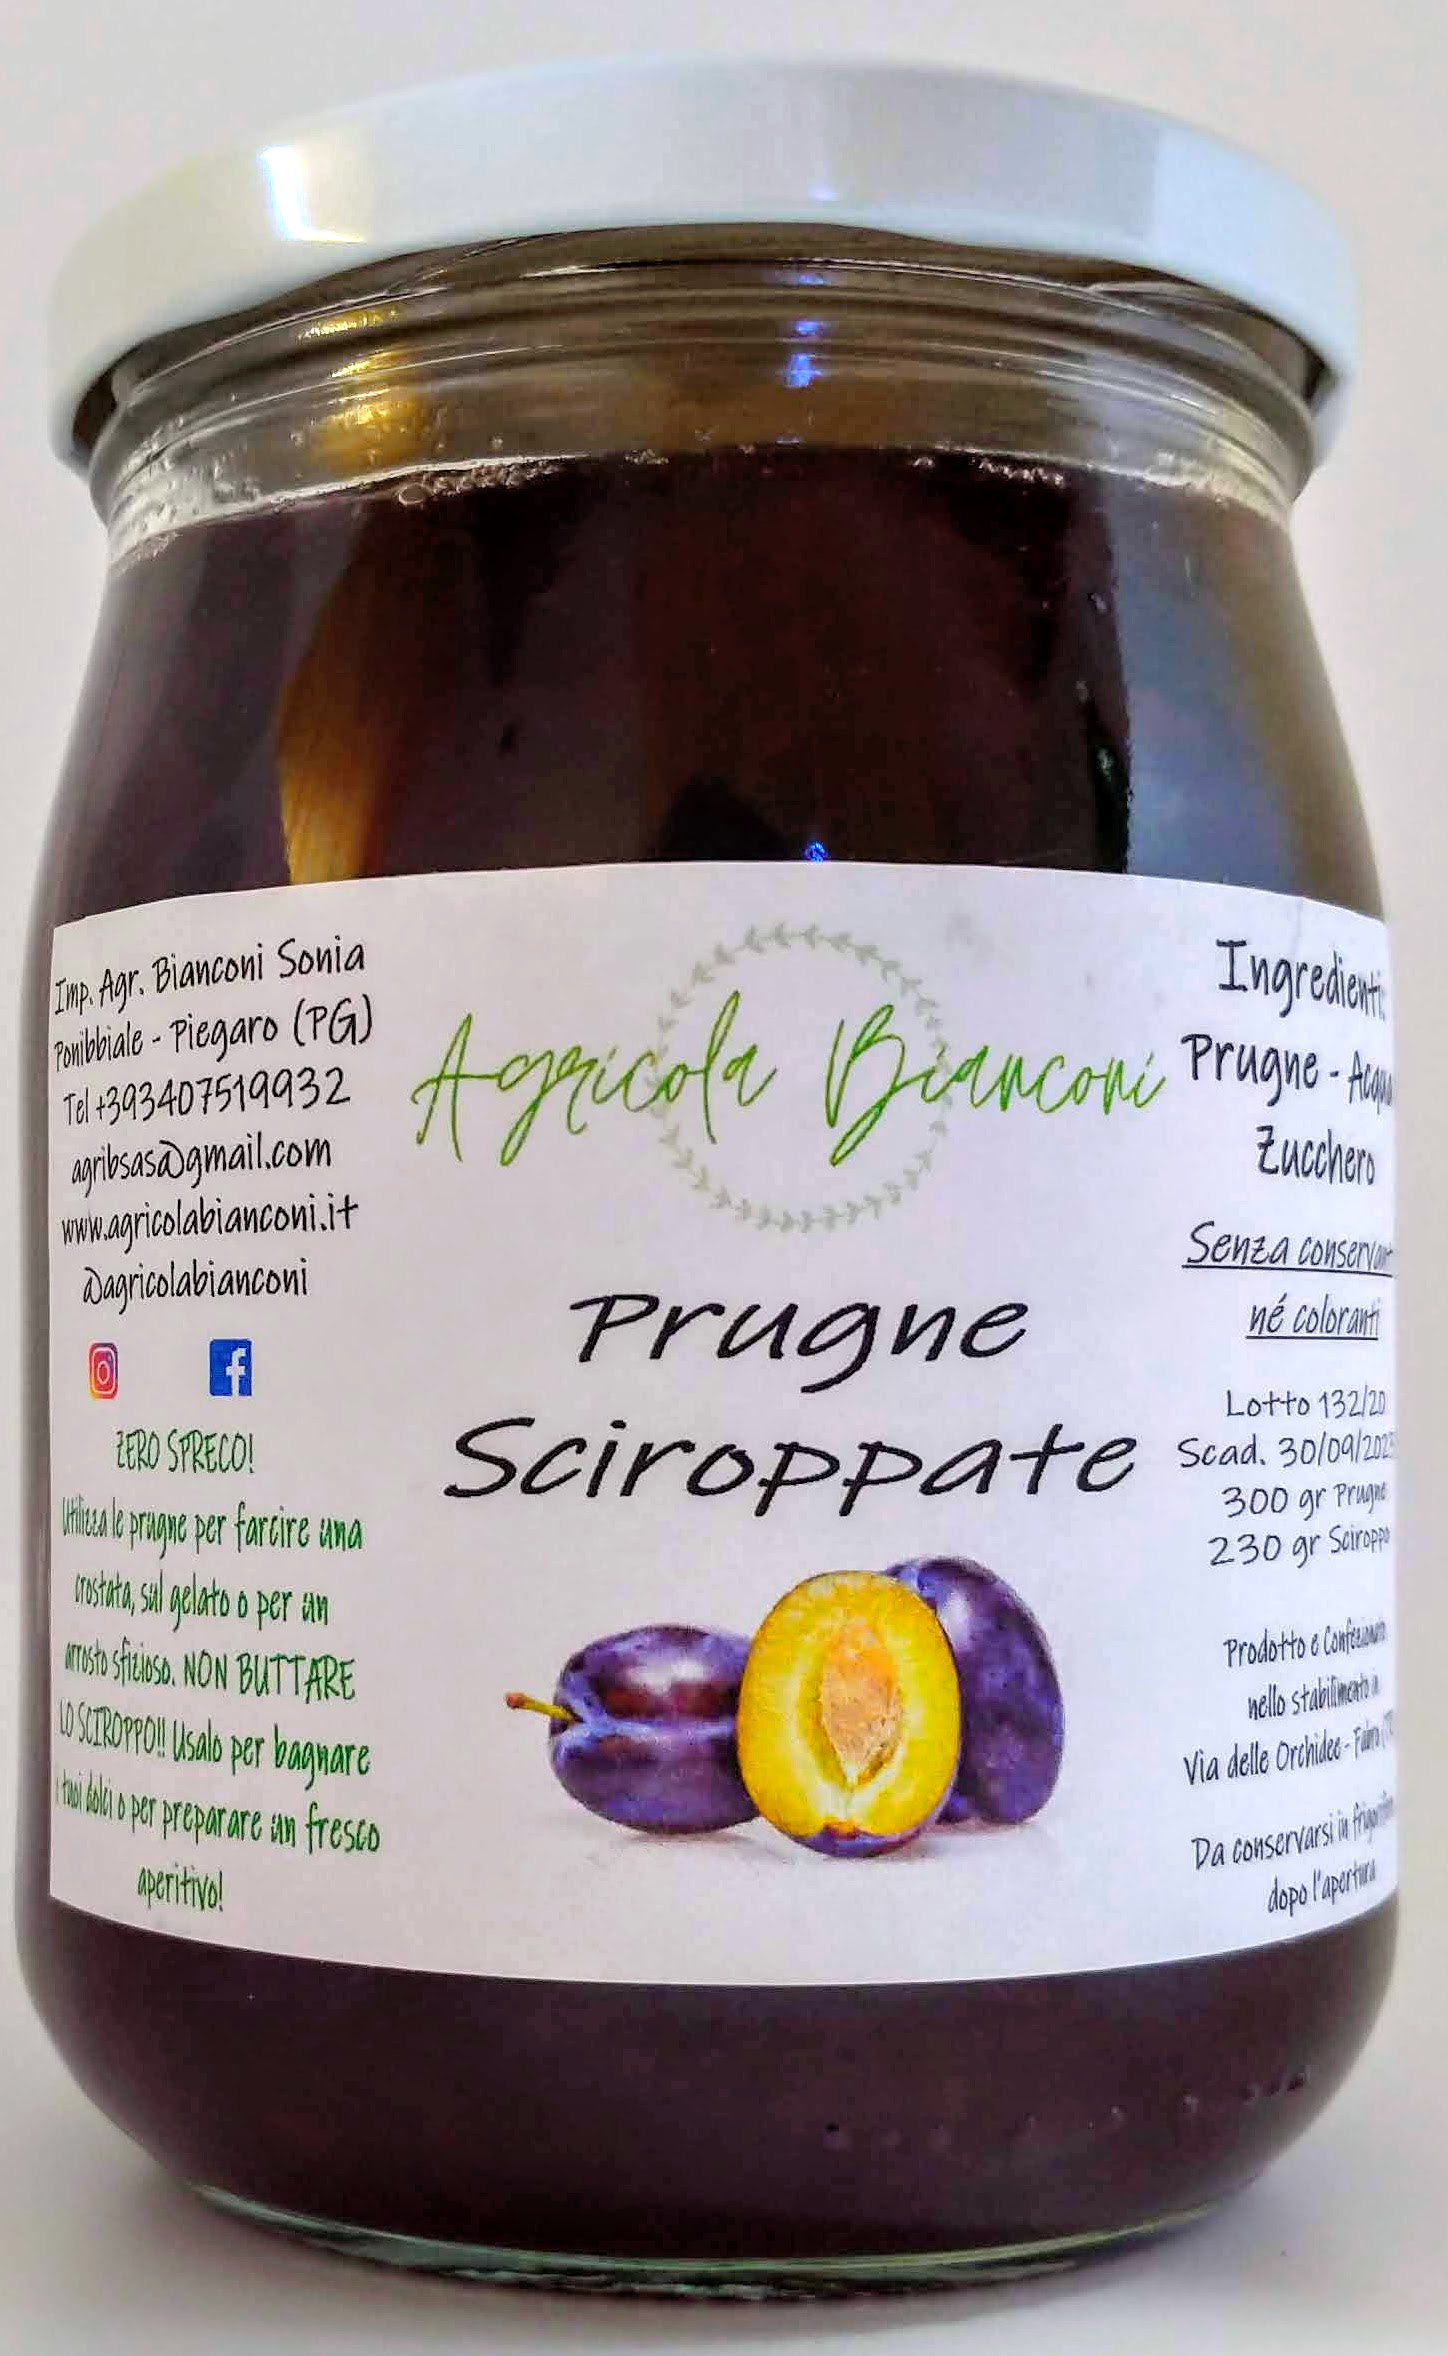 PRUGNE SCIROPPATE 530 GR - PLUMS IN SYRUP 530 GR